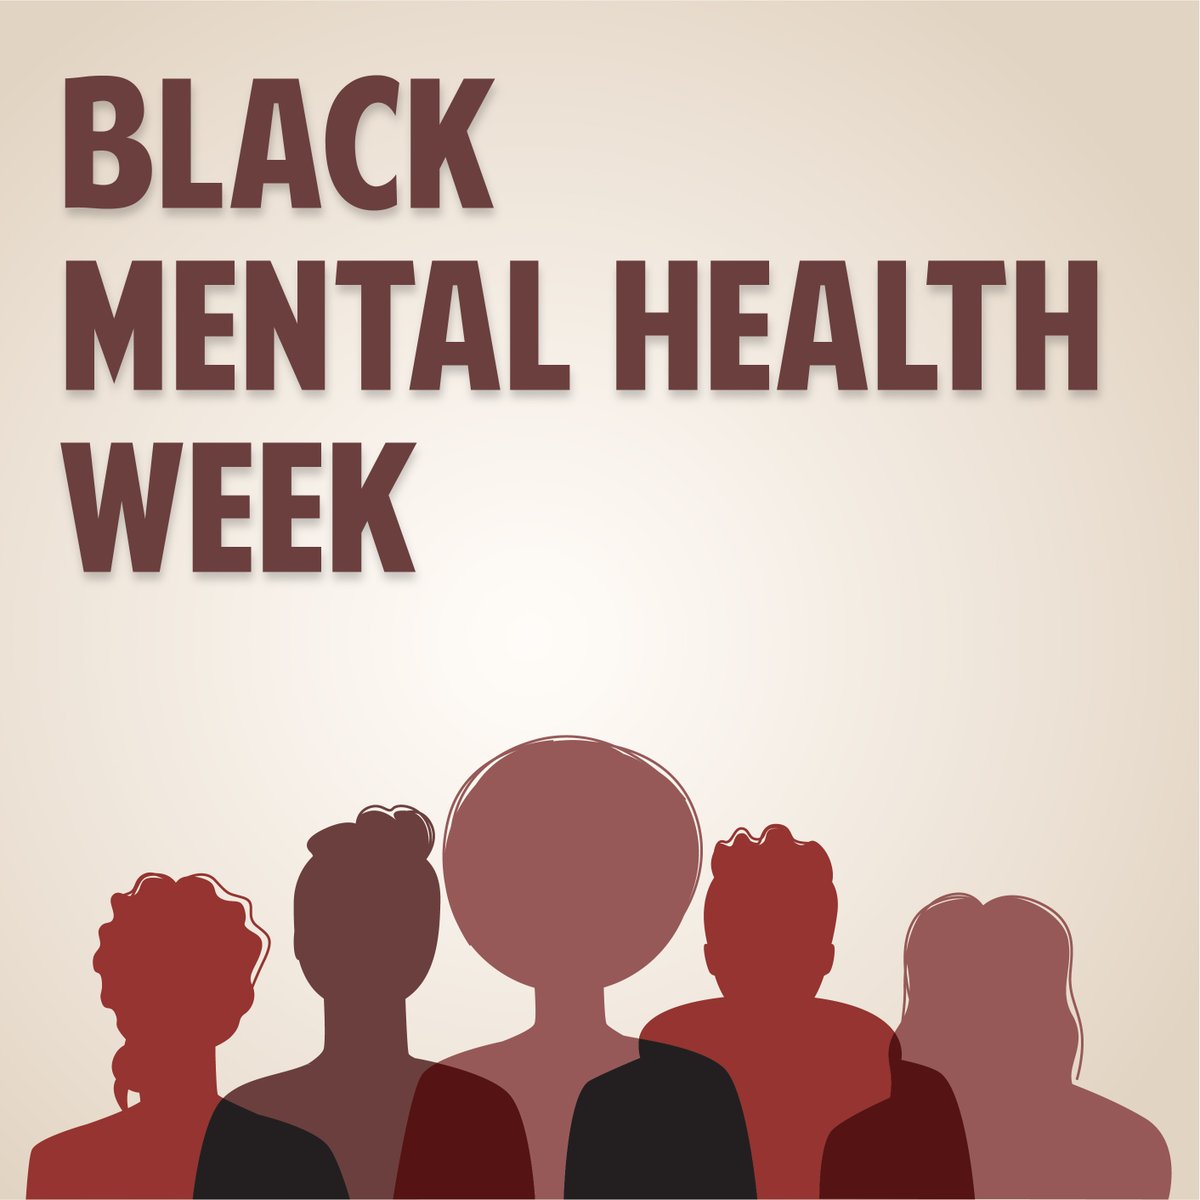 #BlackMentalHealthWeek raises awareness about the deep impact systemic, anti-Black racism has on the mental health & wellness of Black communities– including in Niagara. We are devoted to furthering this education & building an equitable culture for all. 💡bit.ly/35yvFVg